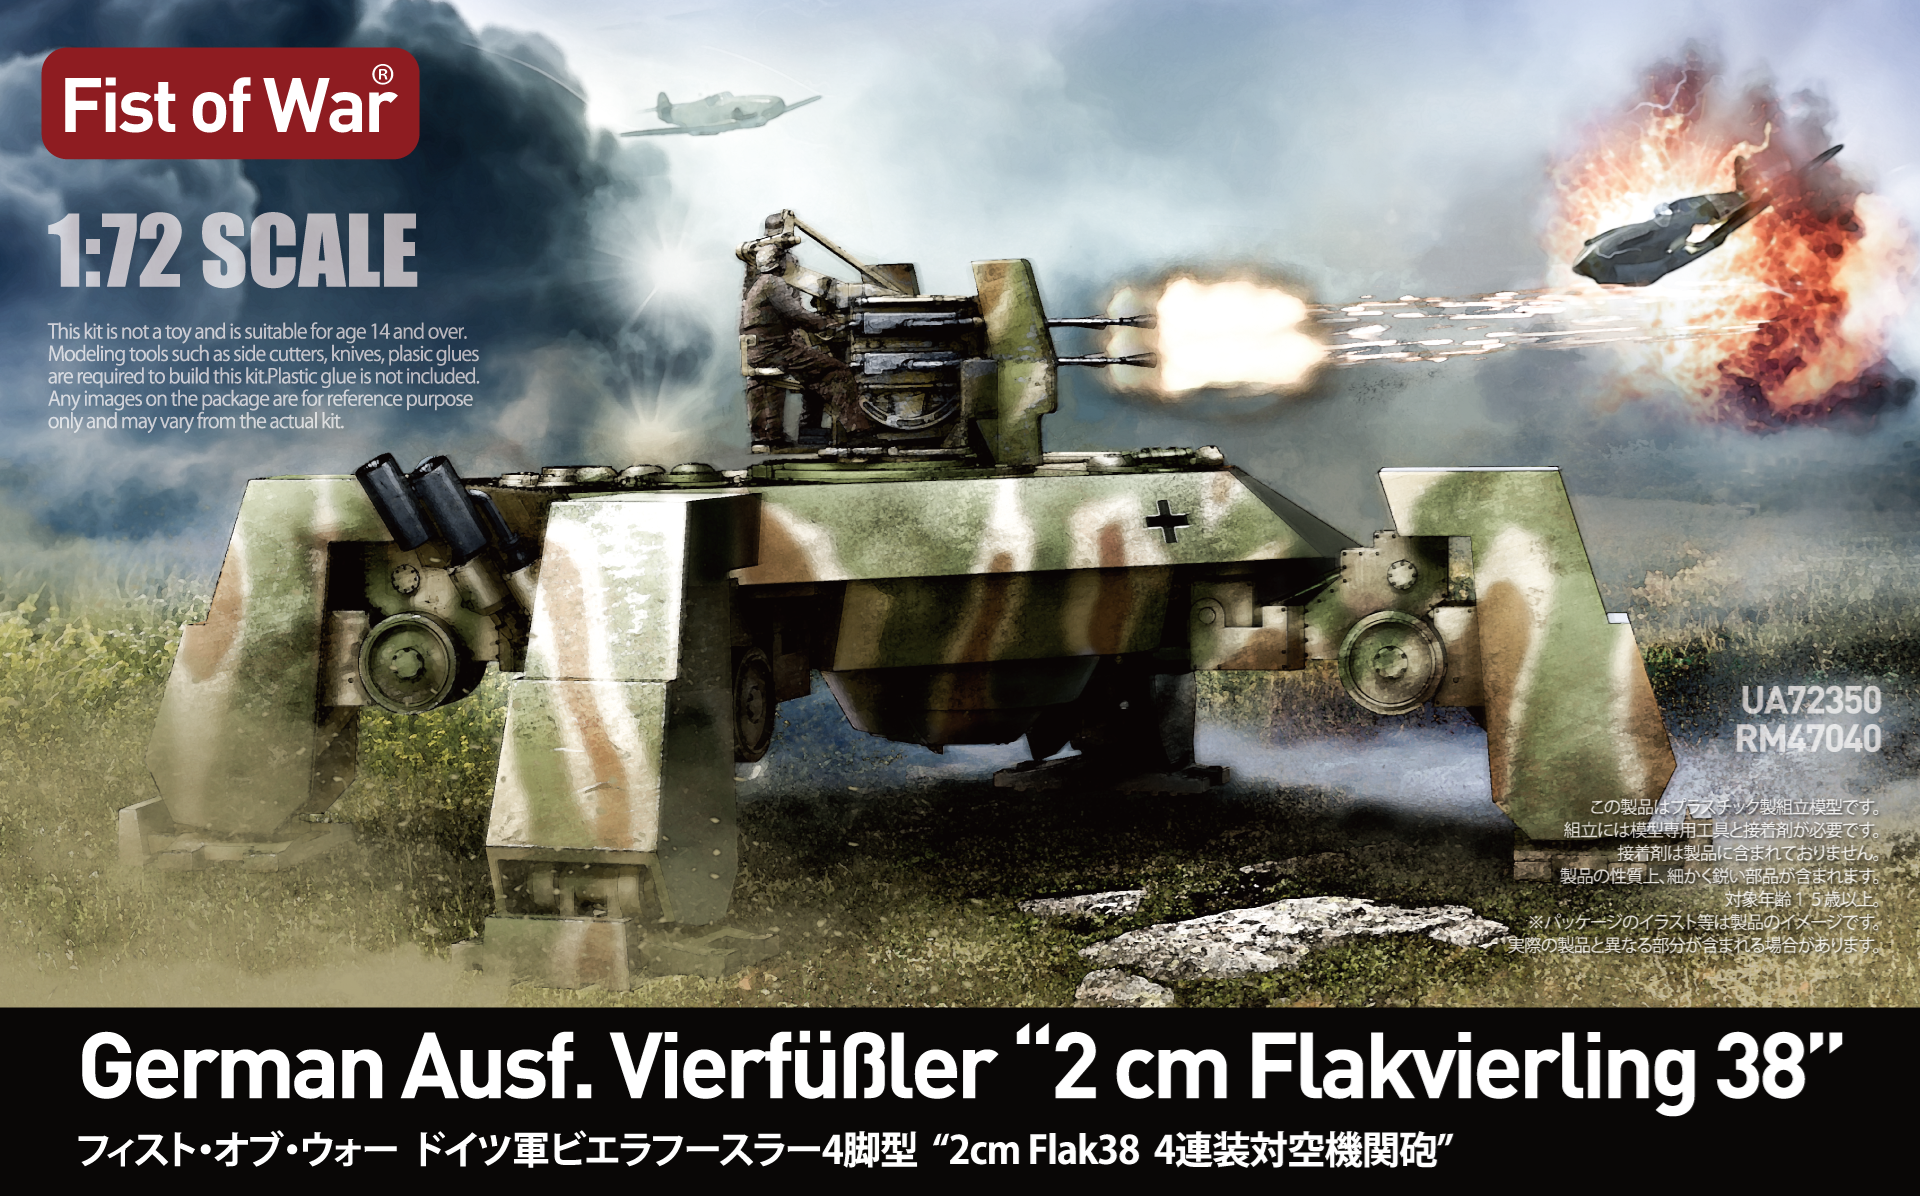 Modelcollect UA72350 - 1:72 Fist of war, WWII germany E50 with flak 38